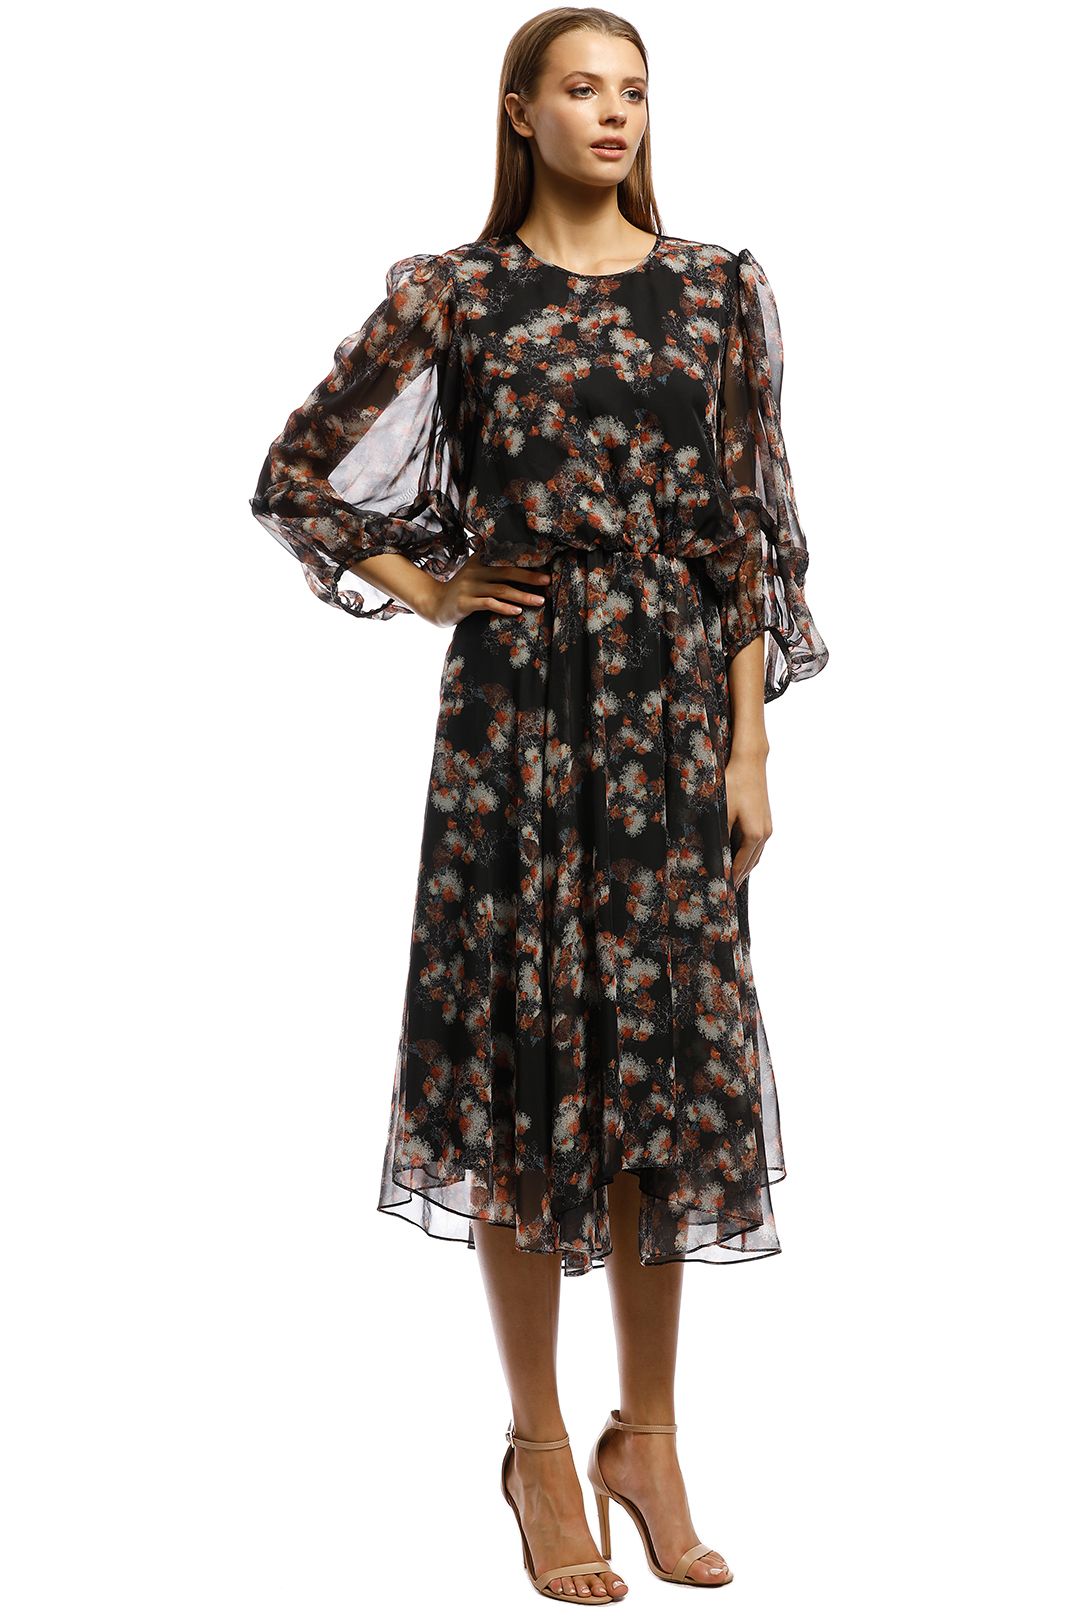 Camilla and Marc-Clio Crew Neck Dress-Black Floral-Side